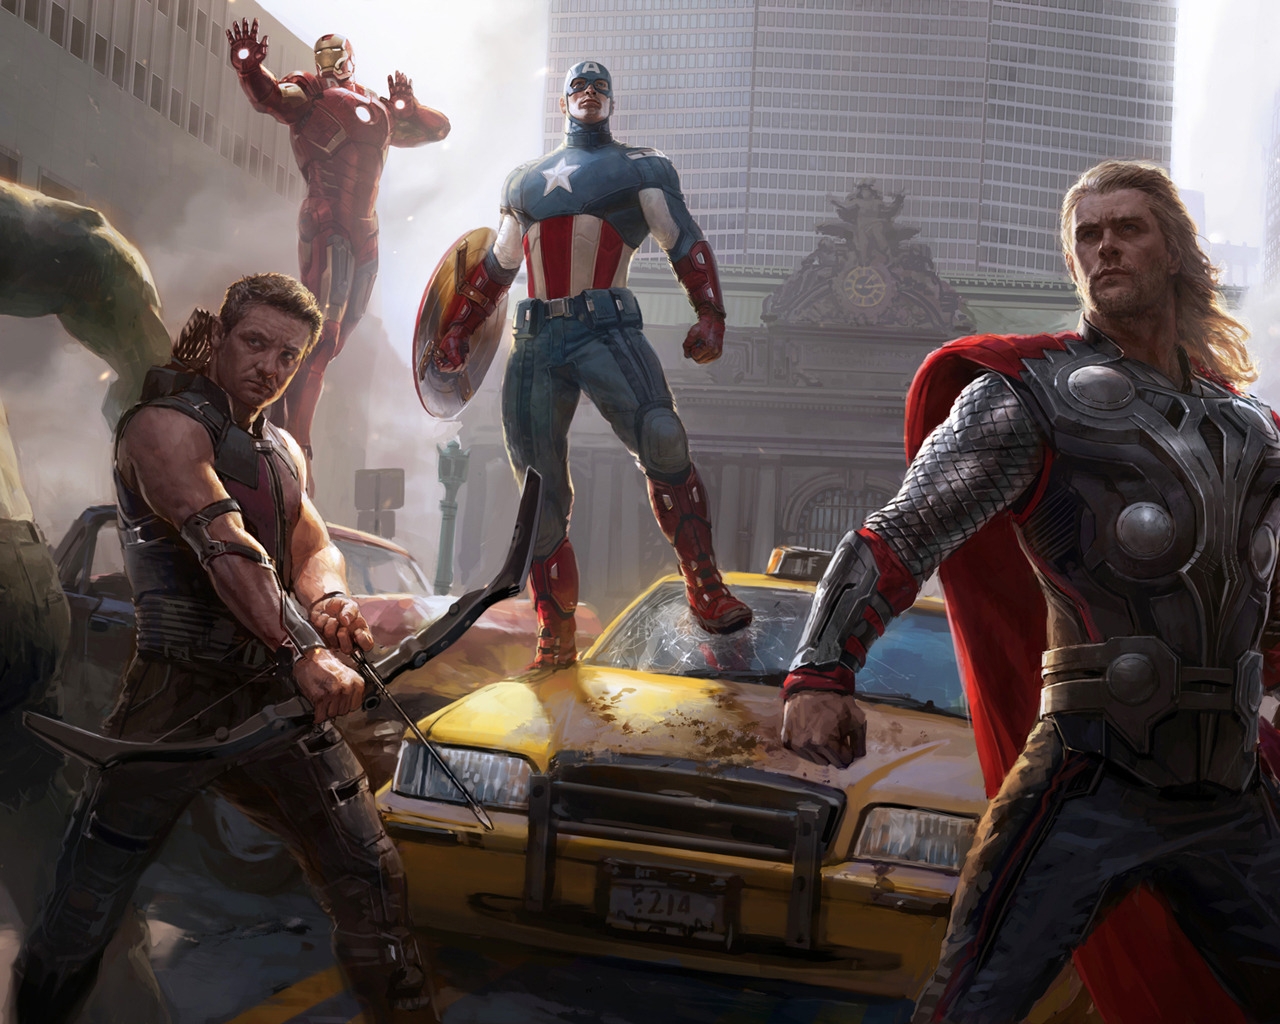 The Avengers Drawing for 1280 x 1024 resolution